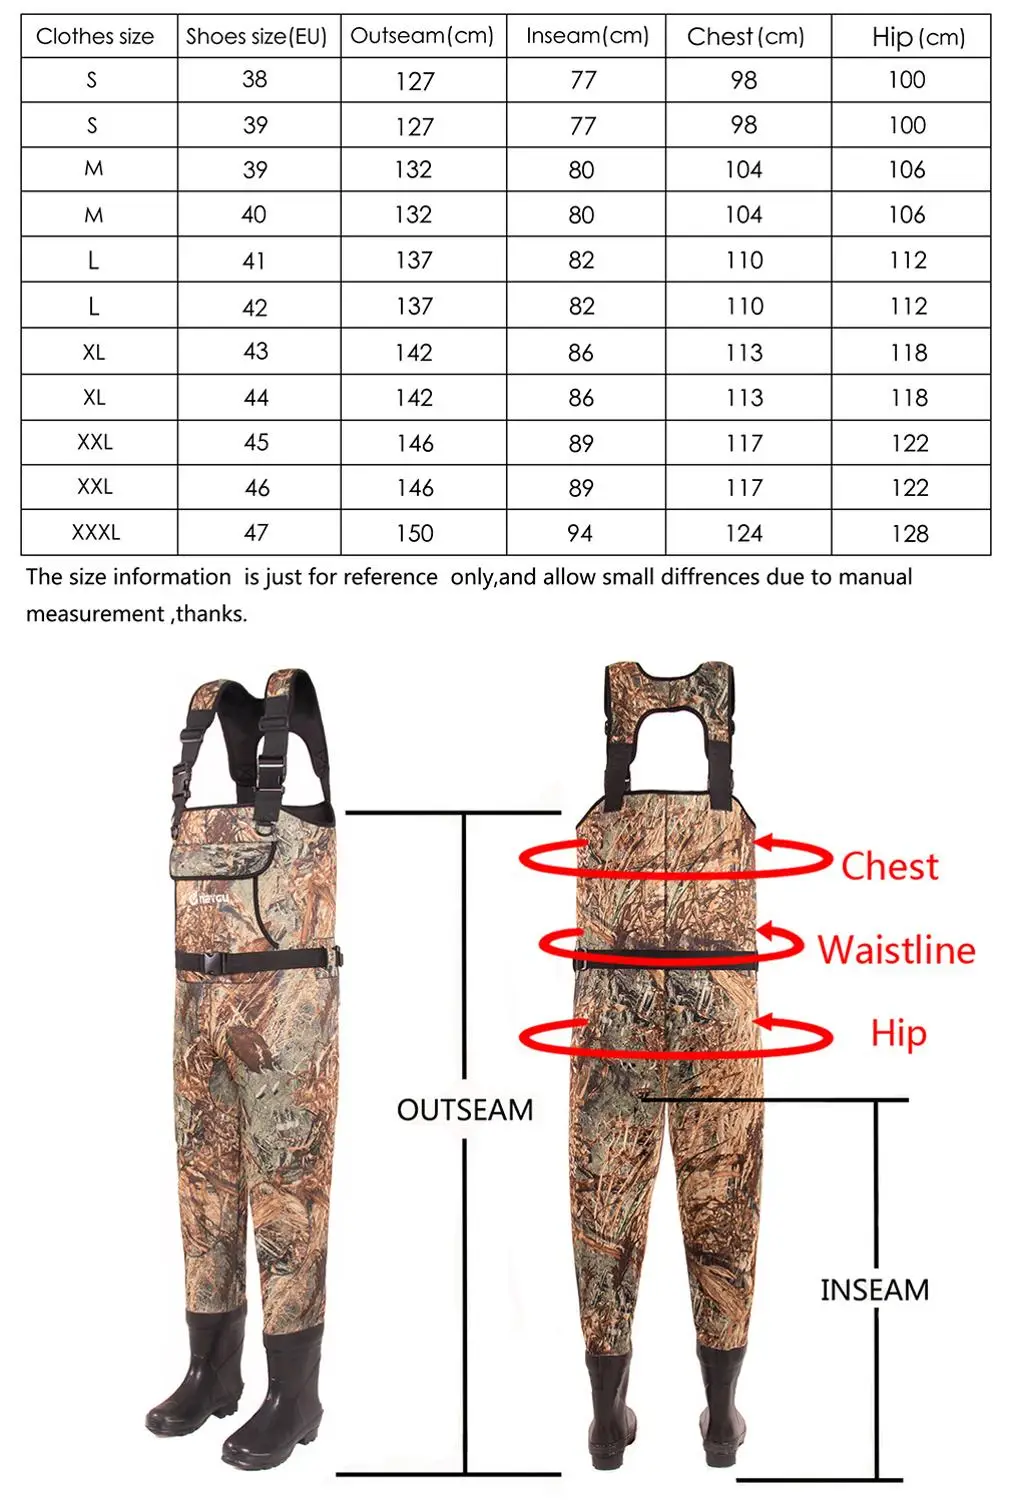 8 Fans Men's Fishing Chest Waders 3-PlyDurable Breathableand